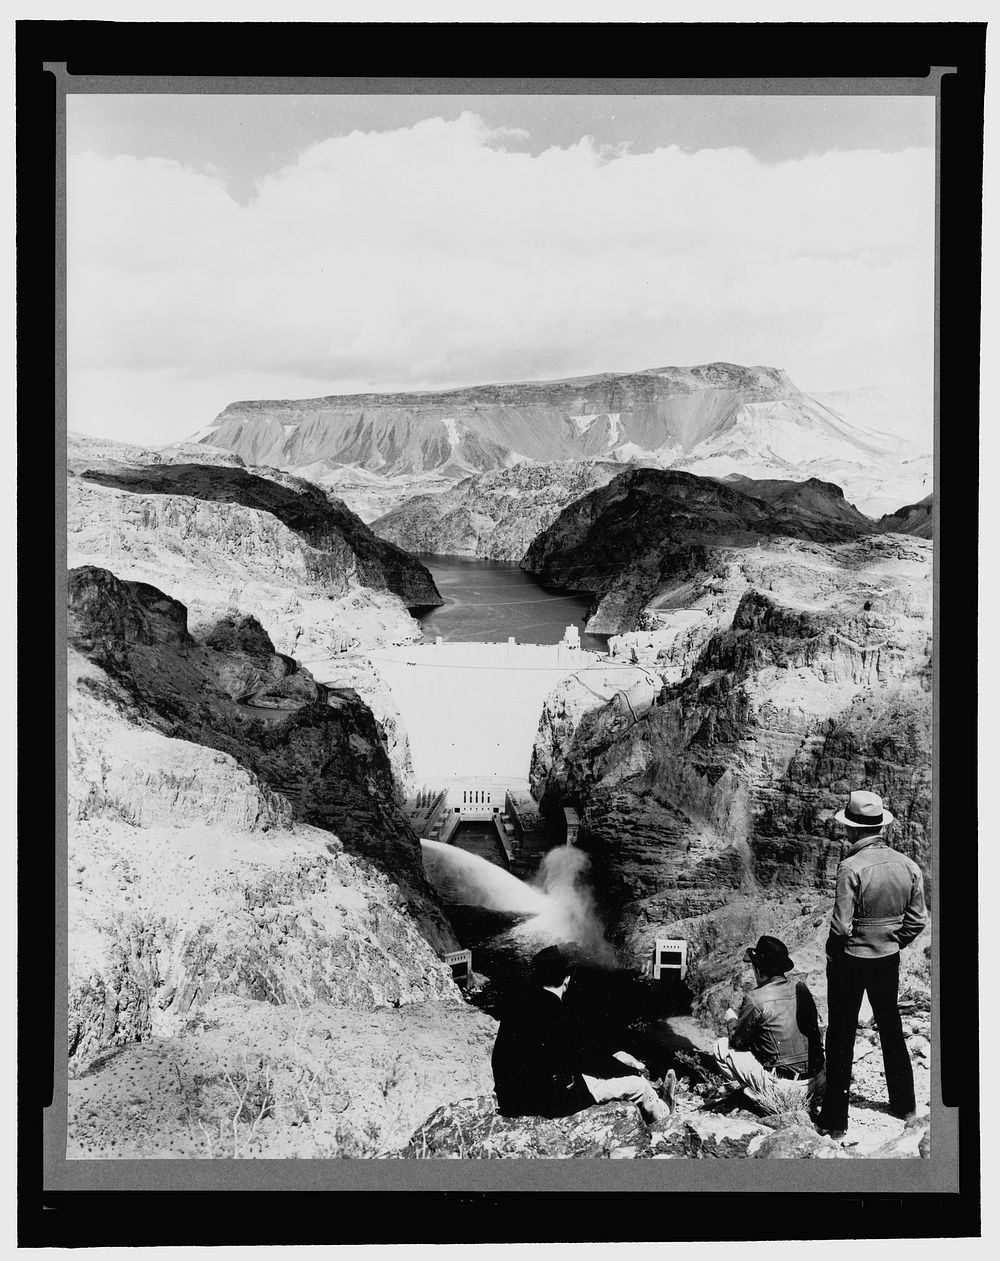 Boulder Dam, between Arizona and Nevada, Apr. 1938. Power plant discharge from two 84-inch needle valves as seen from the…